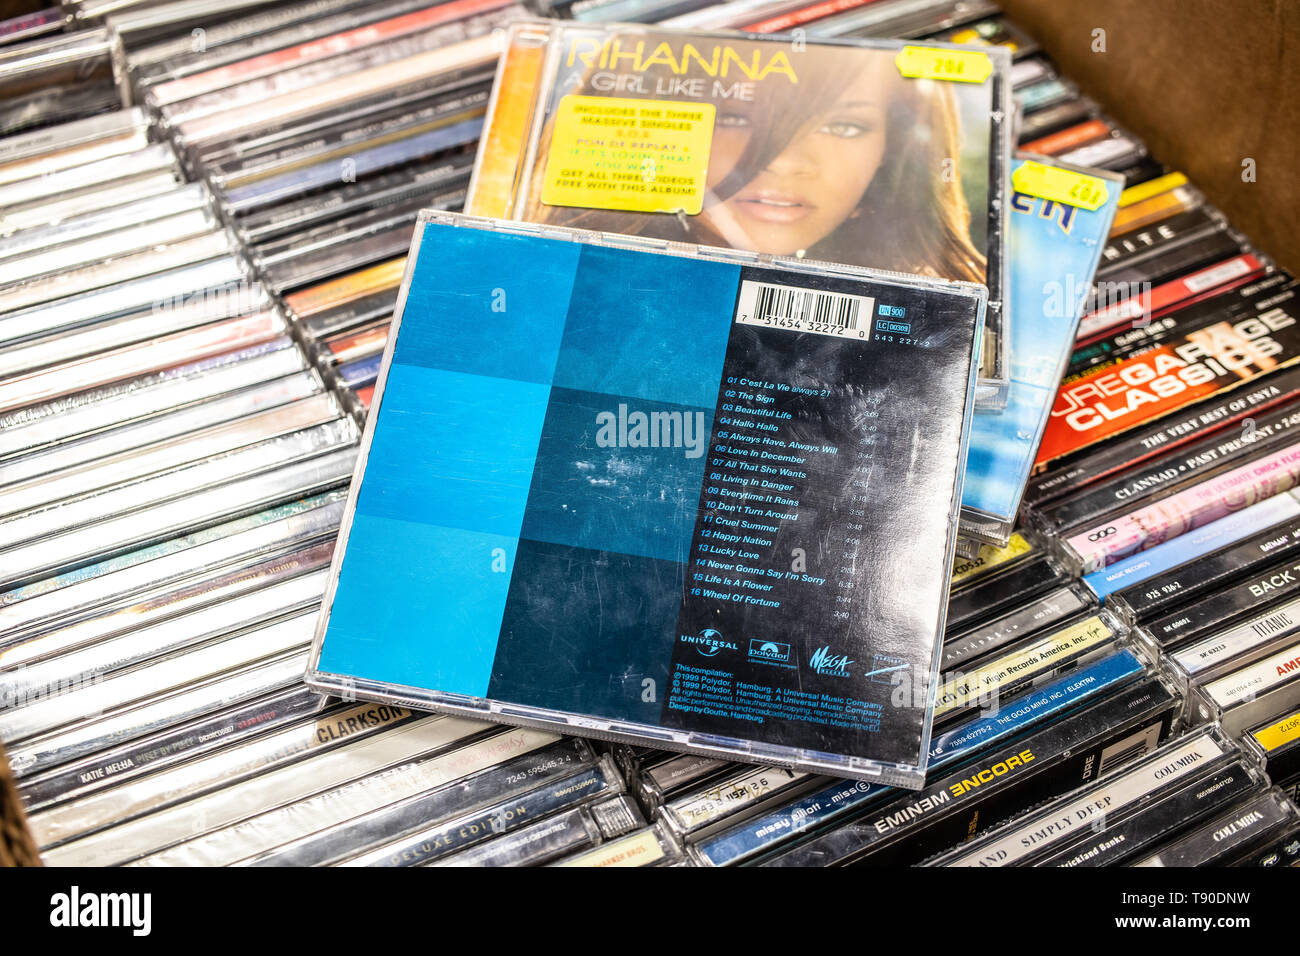 Nadarzyn, Poland, May 11, 2019: Ace of Base CD album Singles of the 90s on display for sale, famous Swedish pop group, collection of CD music albums Stock Photo